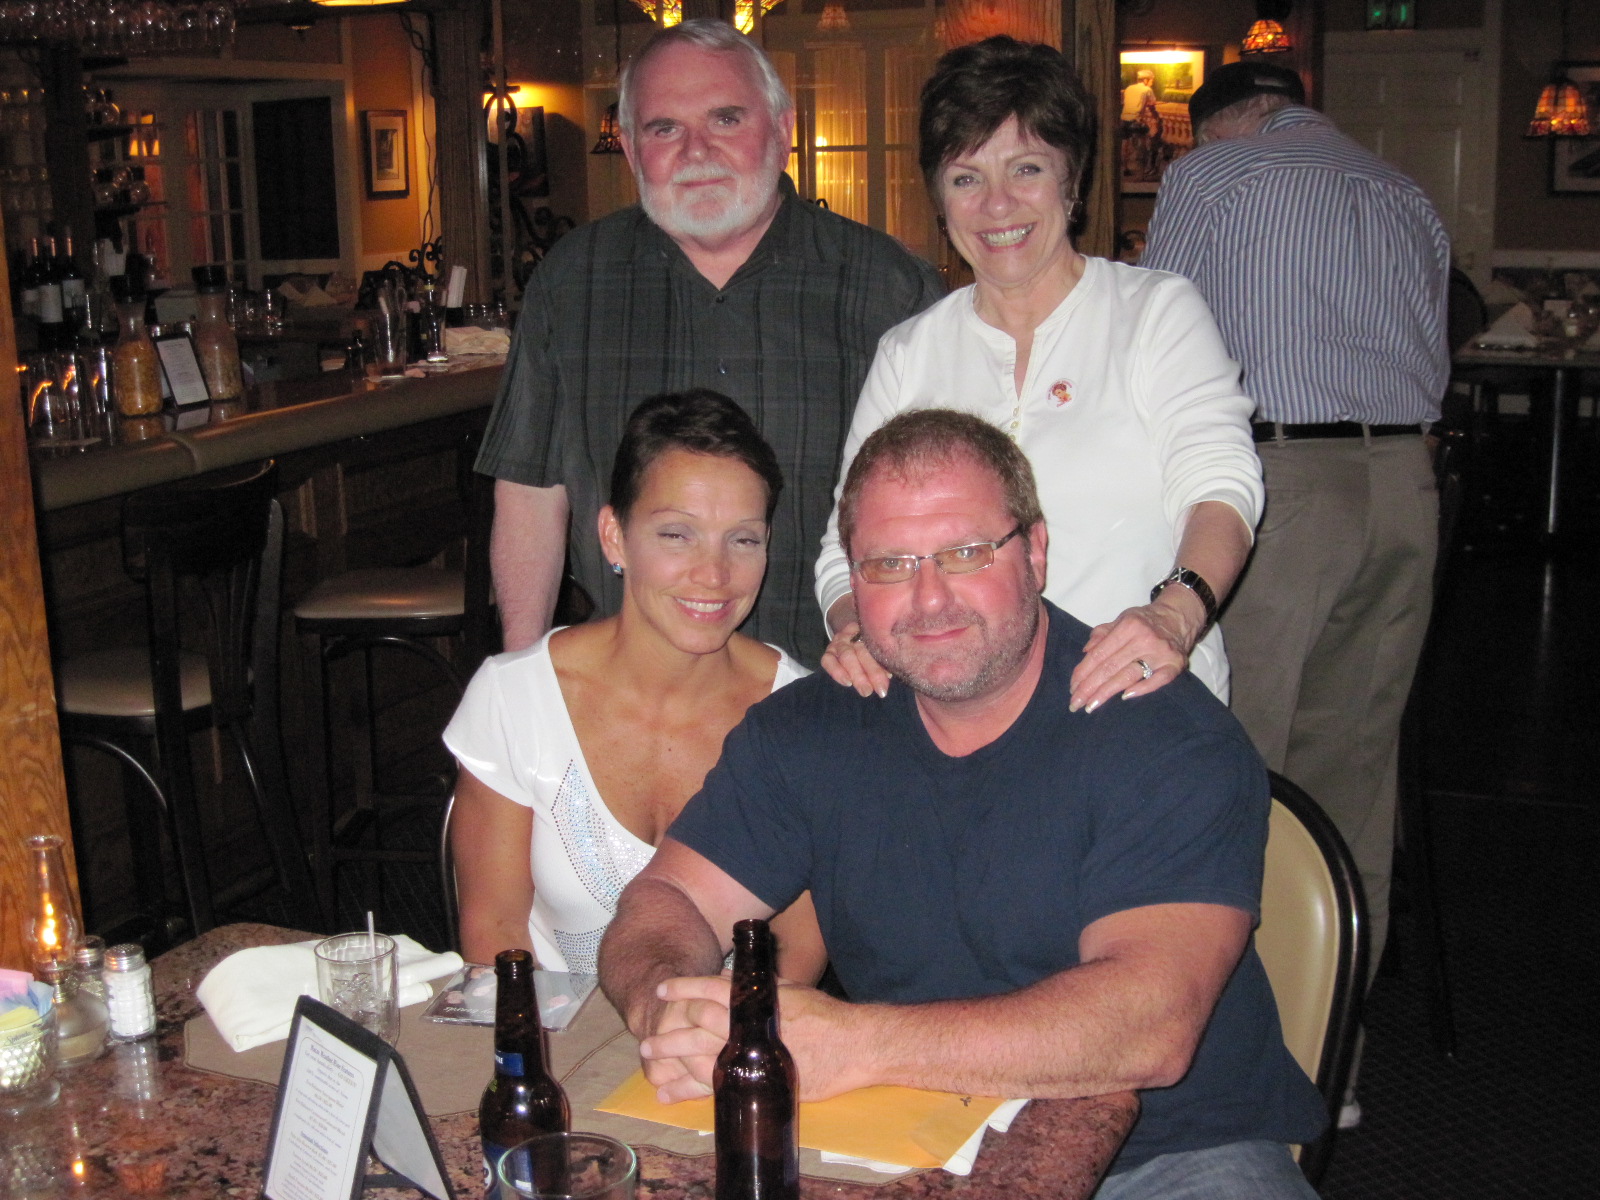 Ron & Ronnie Rhoads and family at the Roosevelt
